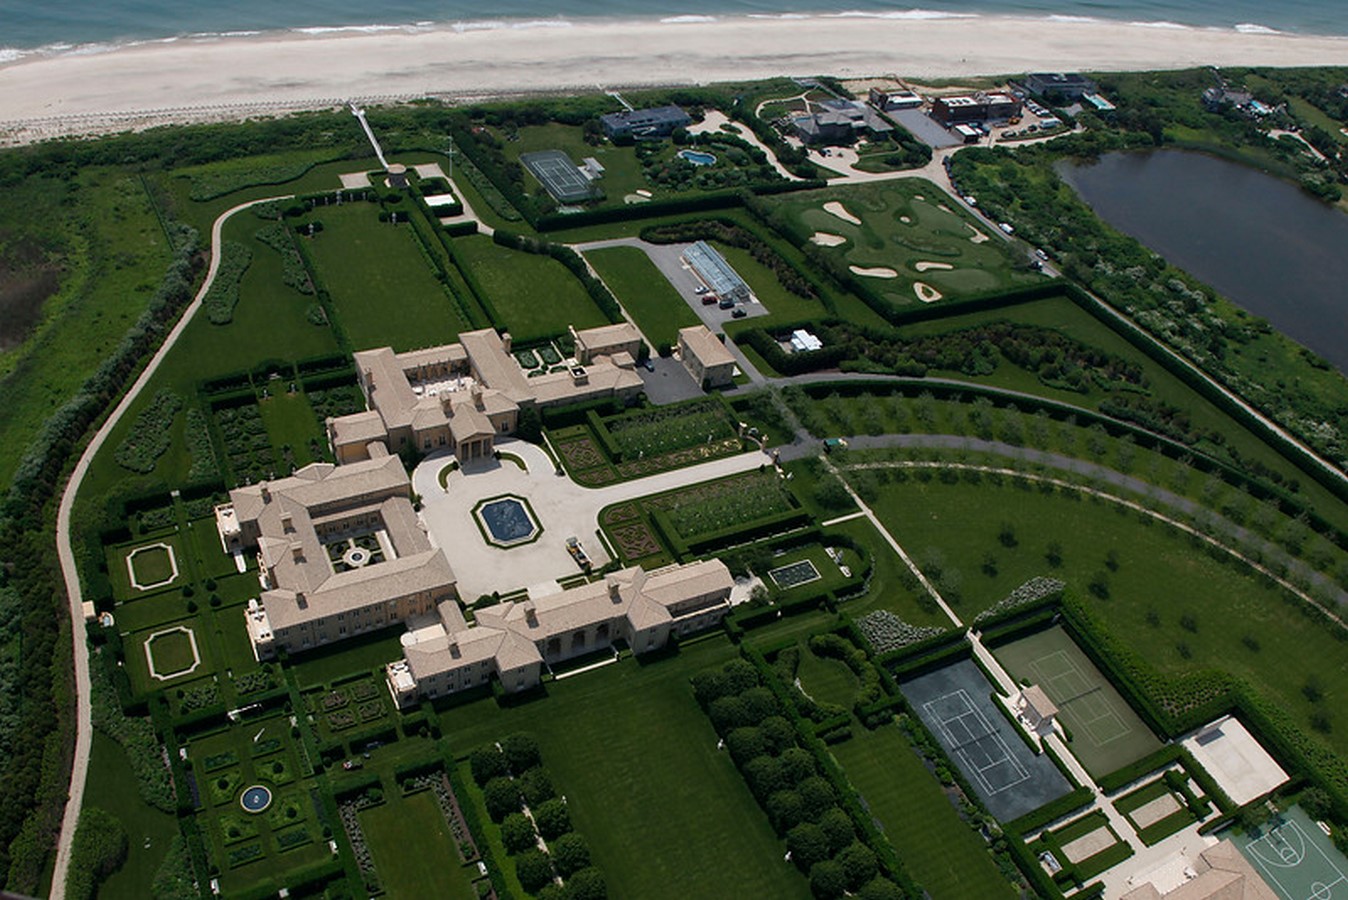 30 Biggest Houses In The World-Fairfield Pond, Hamptons - Sheet3